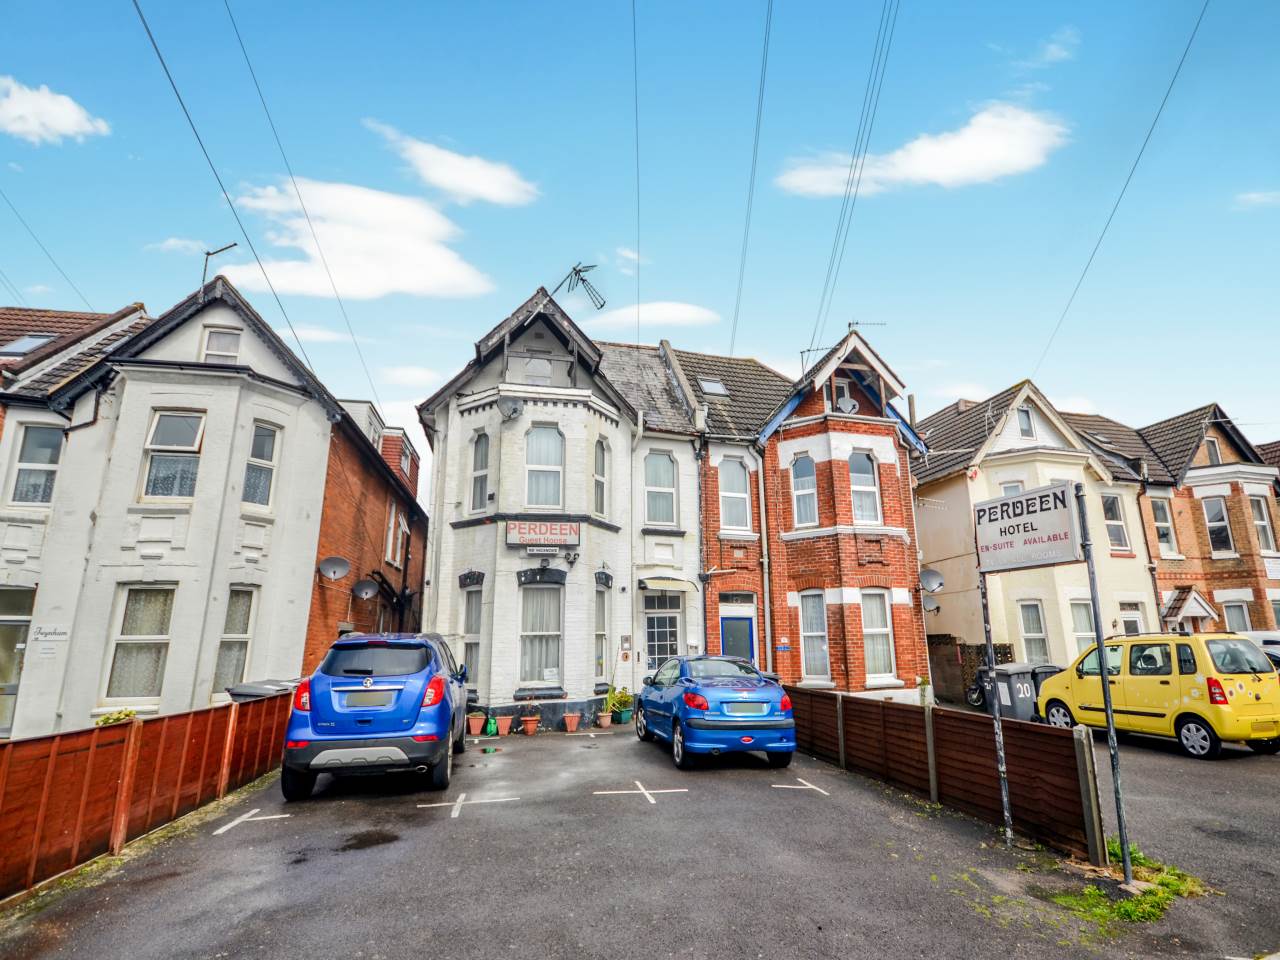 * FOR SALE BY ONLINE AUCTION * PRE AUCTION OFFERS CONSIDERED * MORTGAGE BUYERS WELCOME * GUEST HOUSE * REQUIRES UPDATING * 10 BEDROOMS * EXCELLENT LOCATION * EXCELLENT INVESTMENT * CLOSE TO BEACHES * CLOSE TO SHOPS * PRIVATE GARDEN * OFF ROAD PARKING *